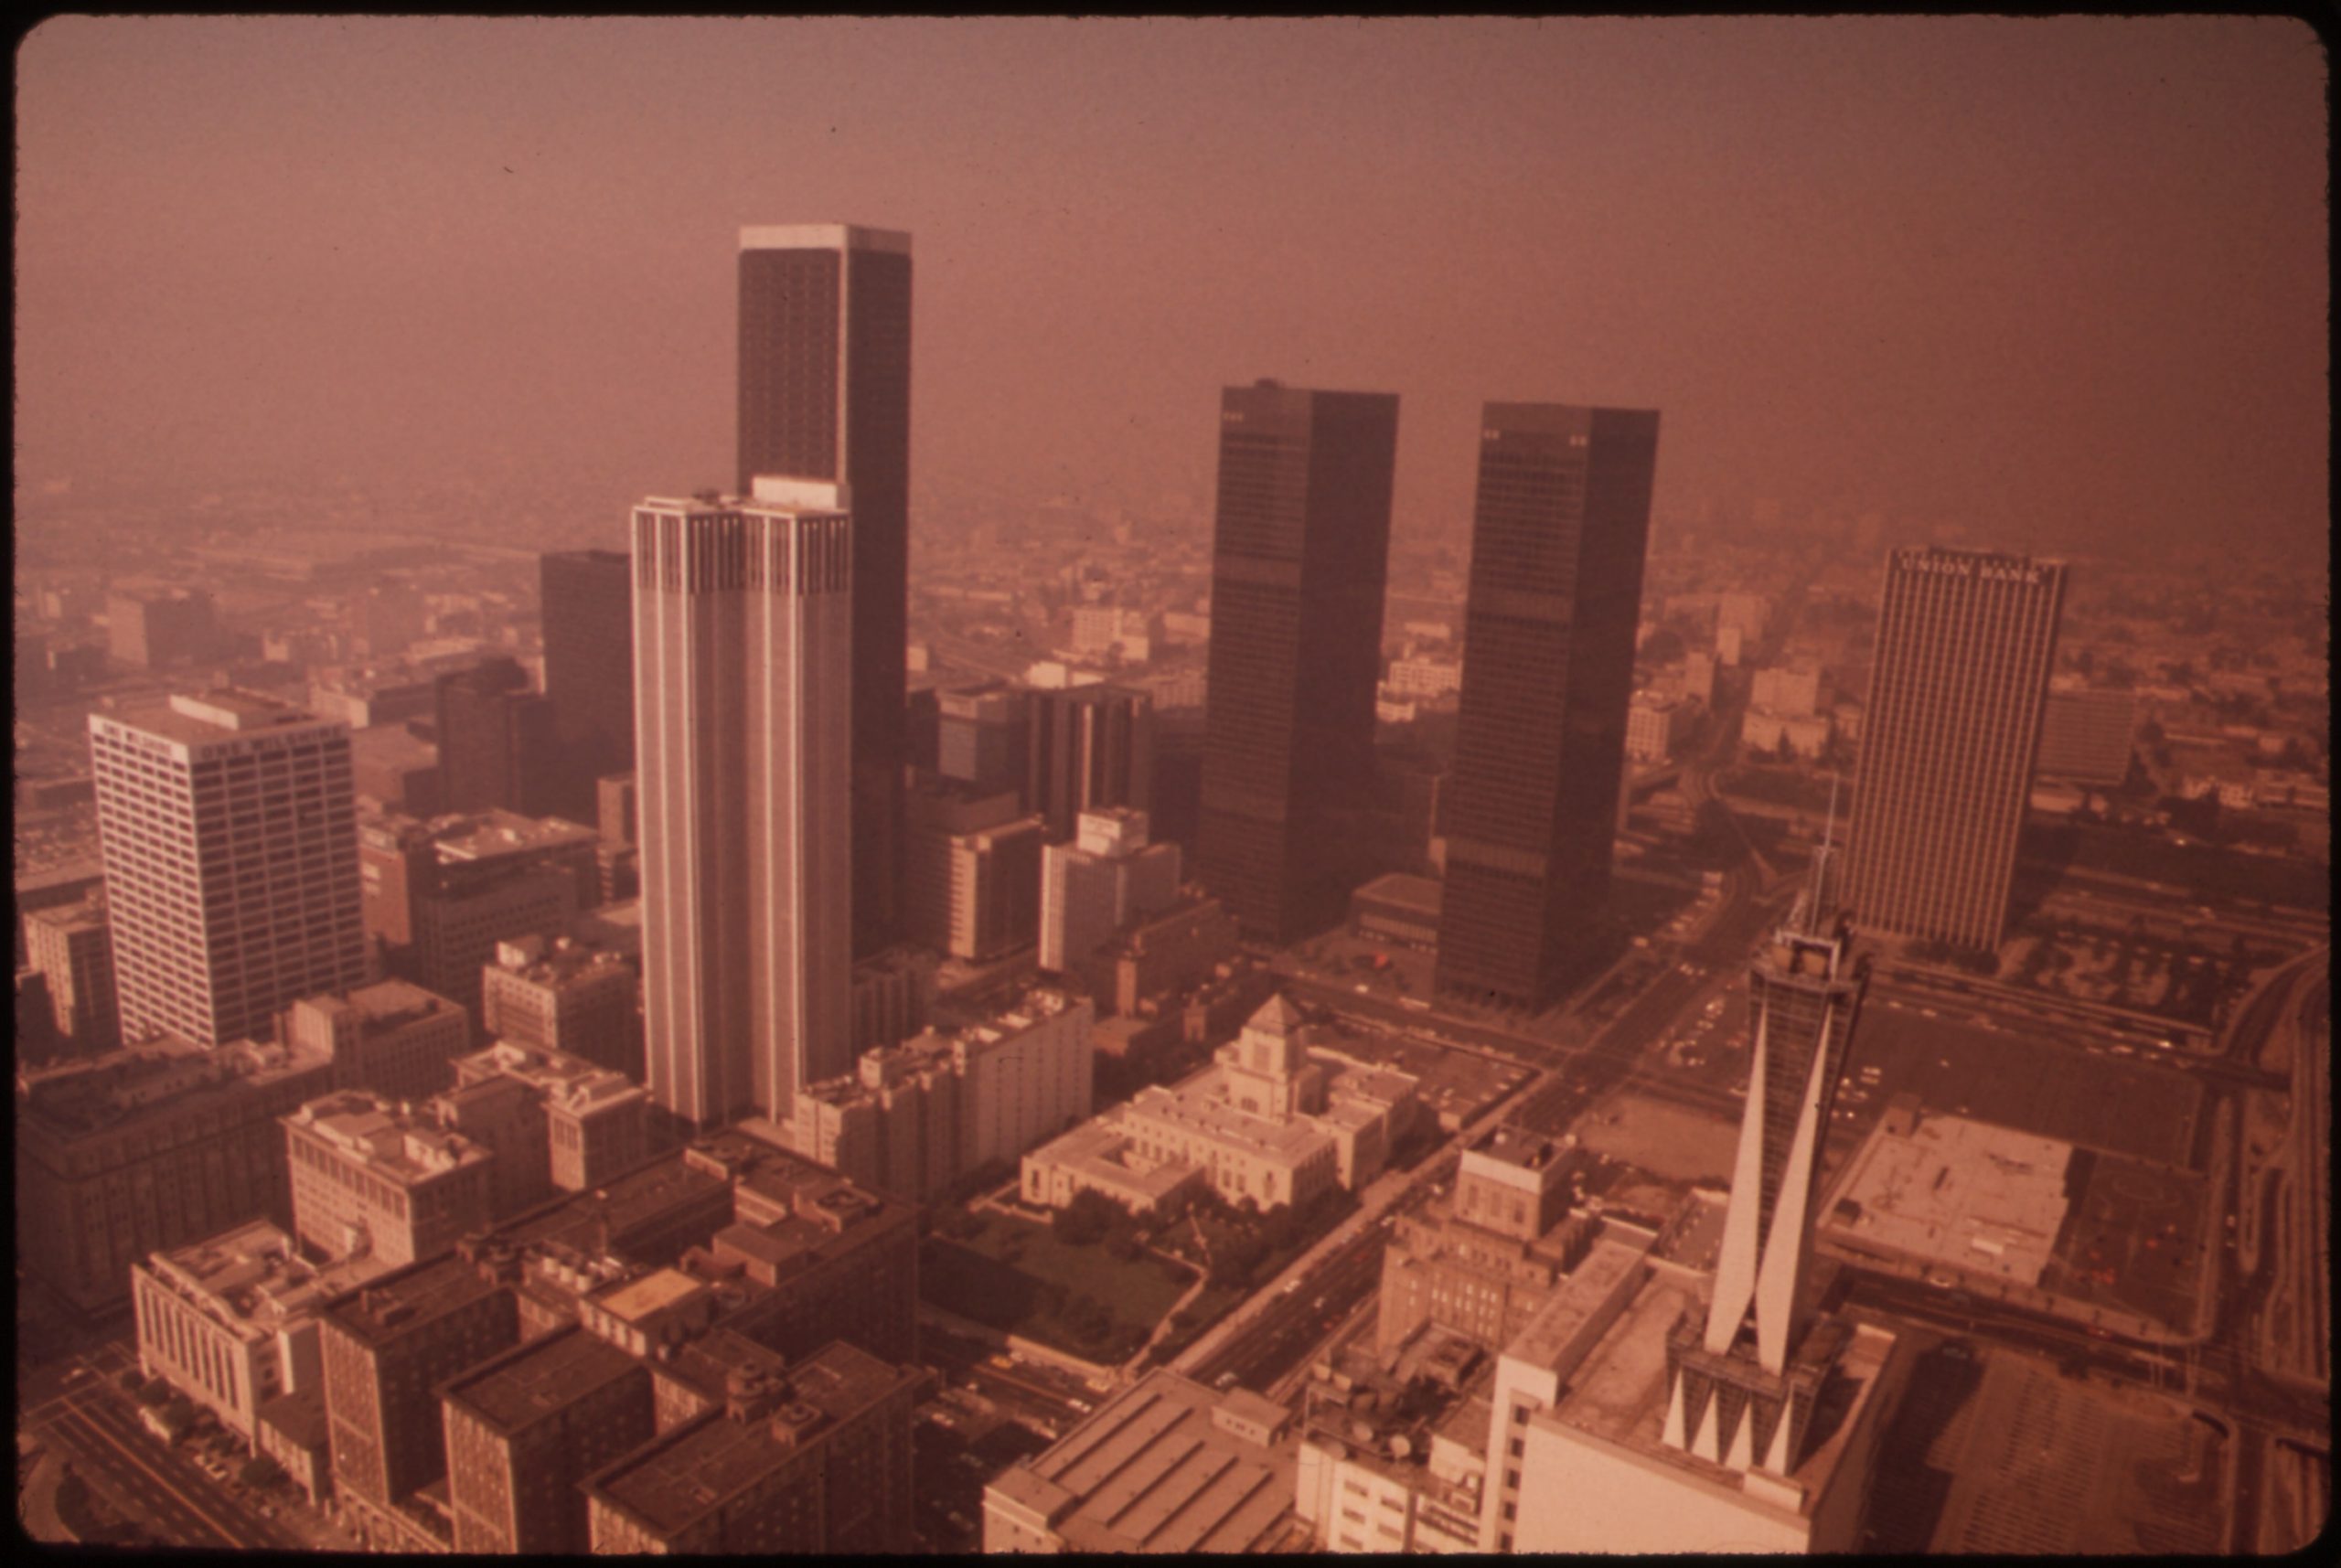 Smog over the Los Angeles skyline in 1973